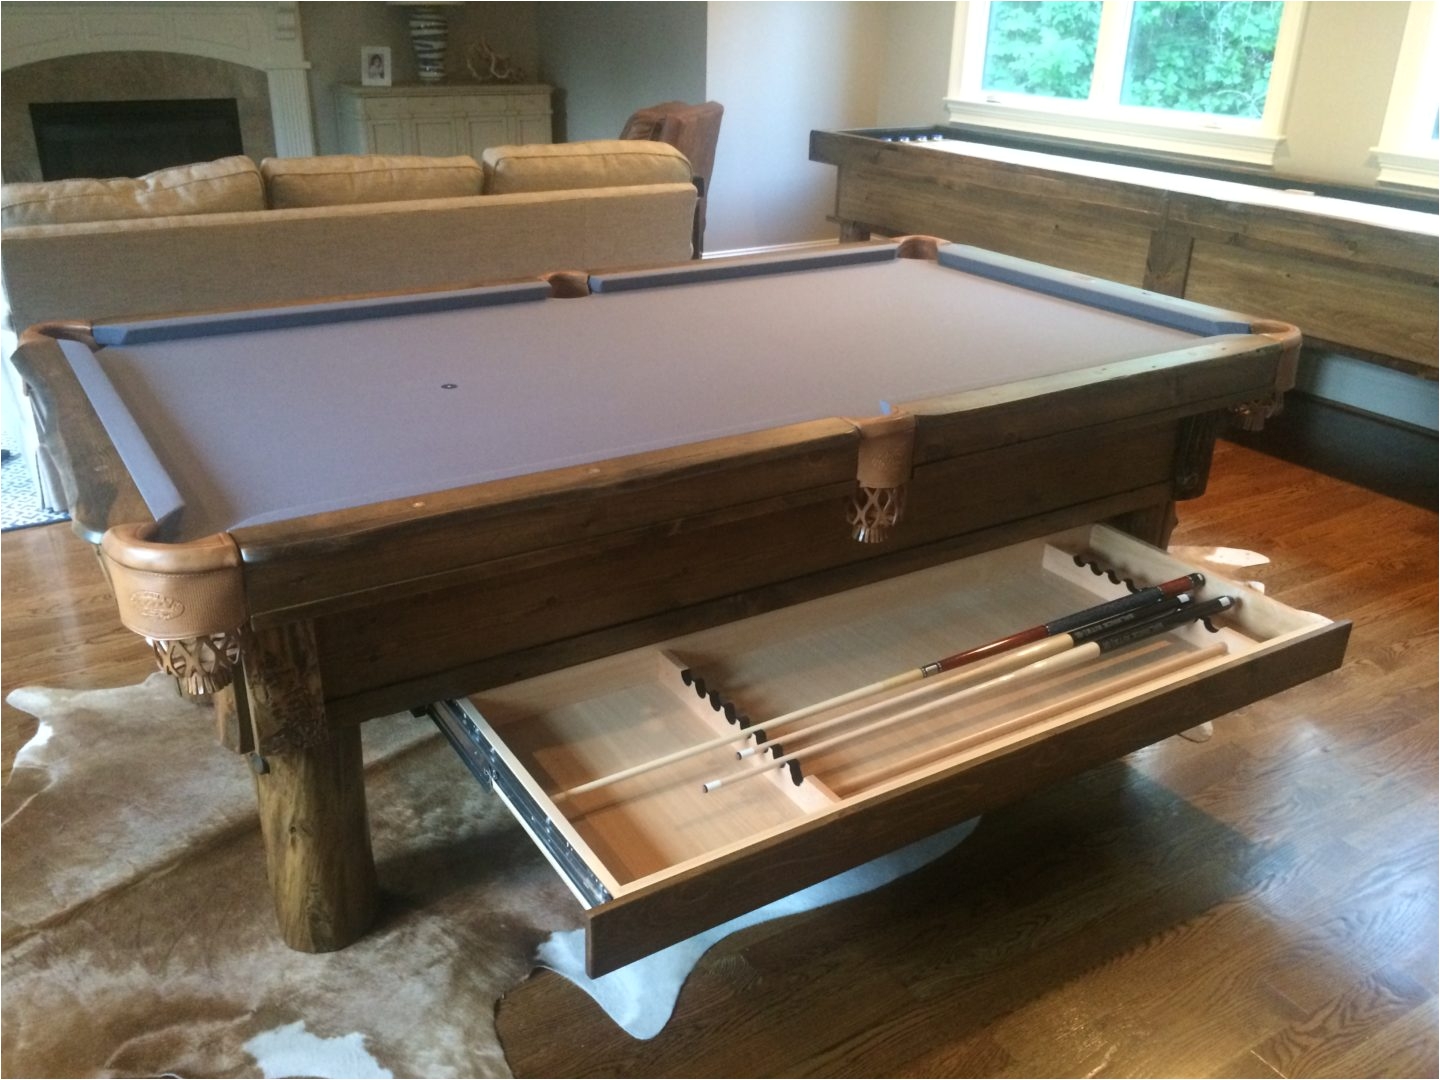 pool table installs check out some of our favorite installs here and start envisioning your own game room